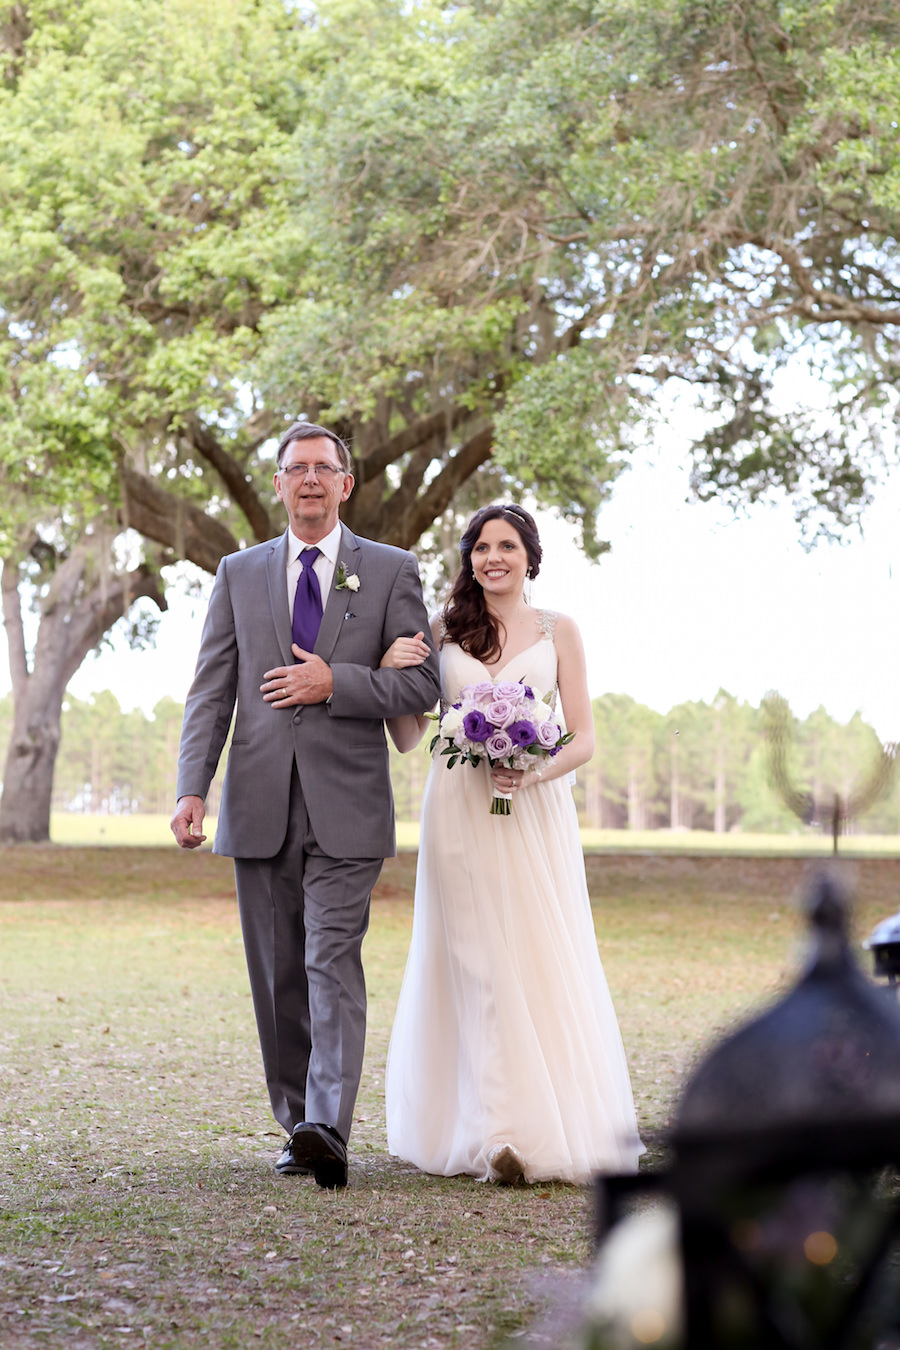 Bride and Father Wedding Ceremony Portrait Walking Down the Aisle at Tampa Bay Wedding Venue The Lange Farm | | Purple, Ivory and Lilac Roses Bridal Wedding Bouquet | Tampa Wedding Florist Northside Florist